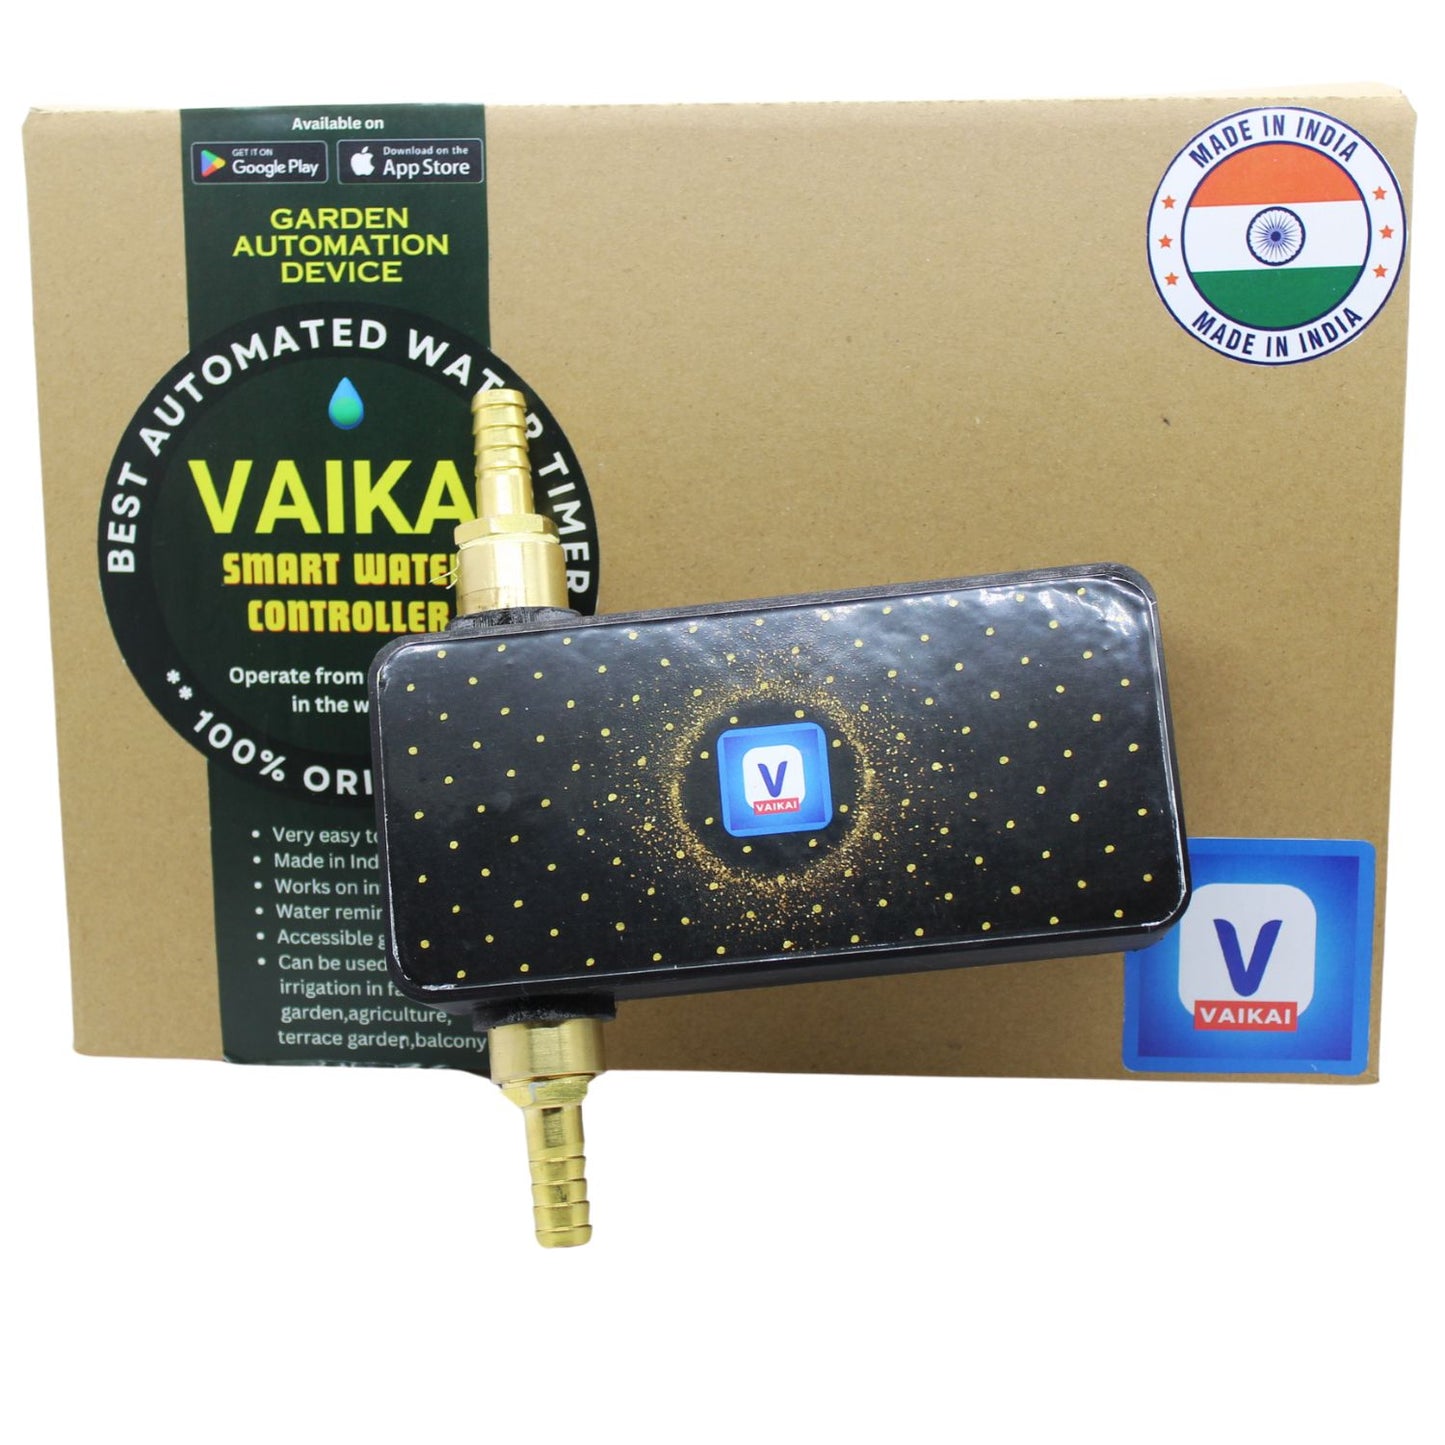 Introducing "Vaikai" - Your Smart Automated Watering Companion